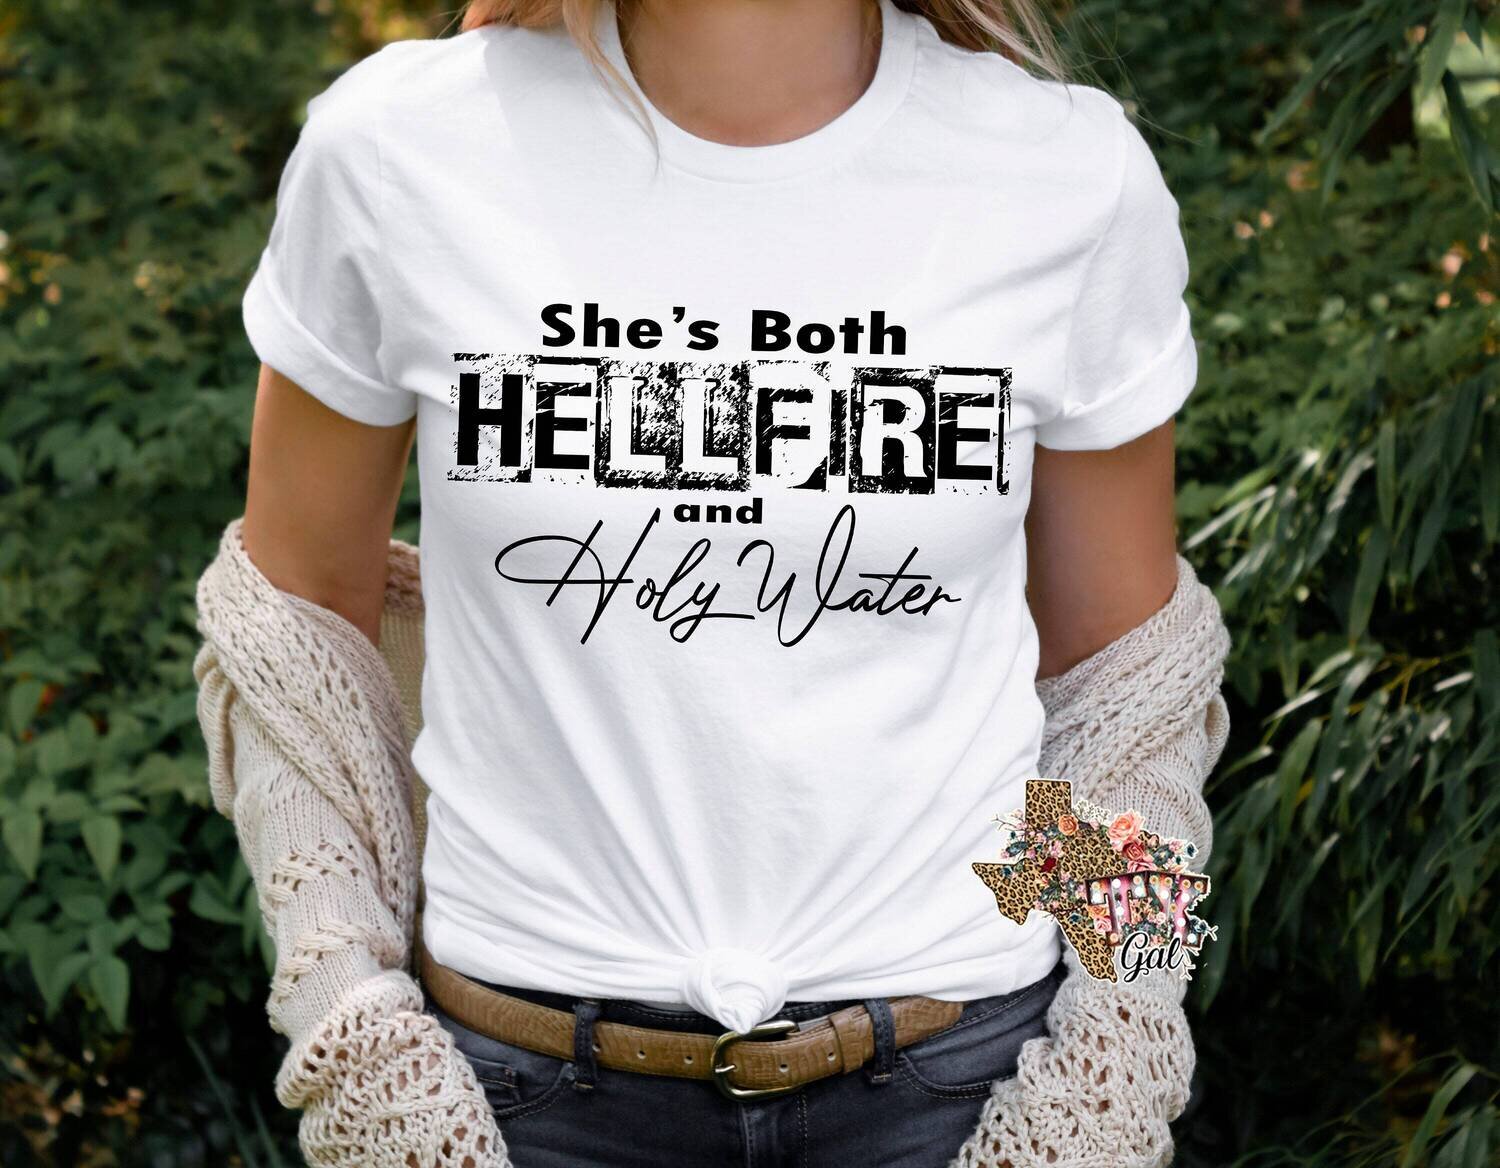 She's Both Hellfire And Holy Water, T-shirt, PNG, sublimation, digital download